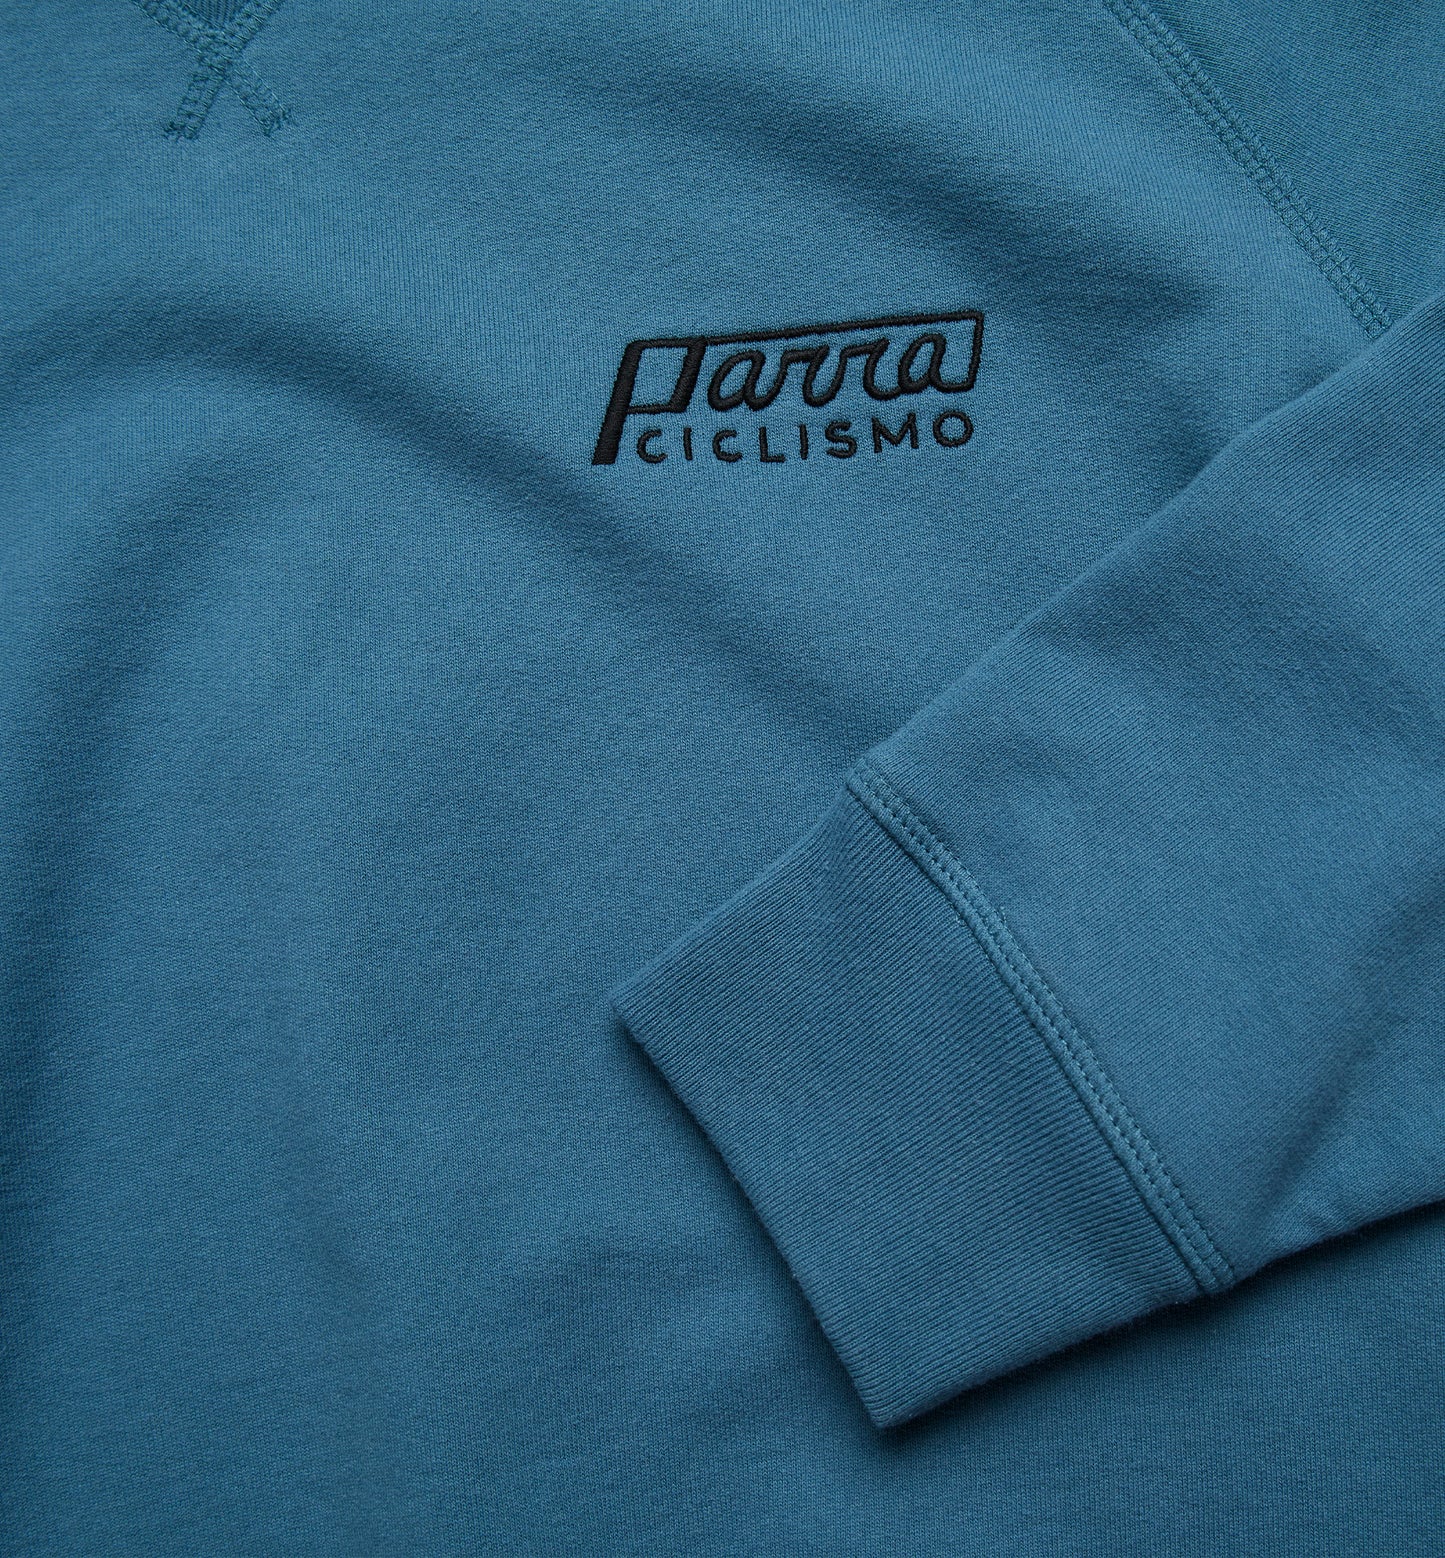 By Parra Ciclismo Crewneck Sweater Teal